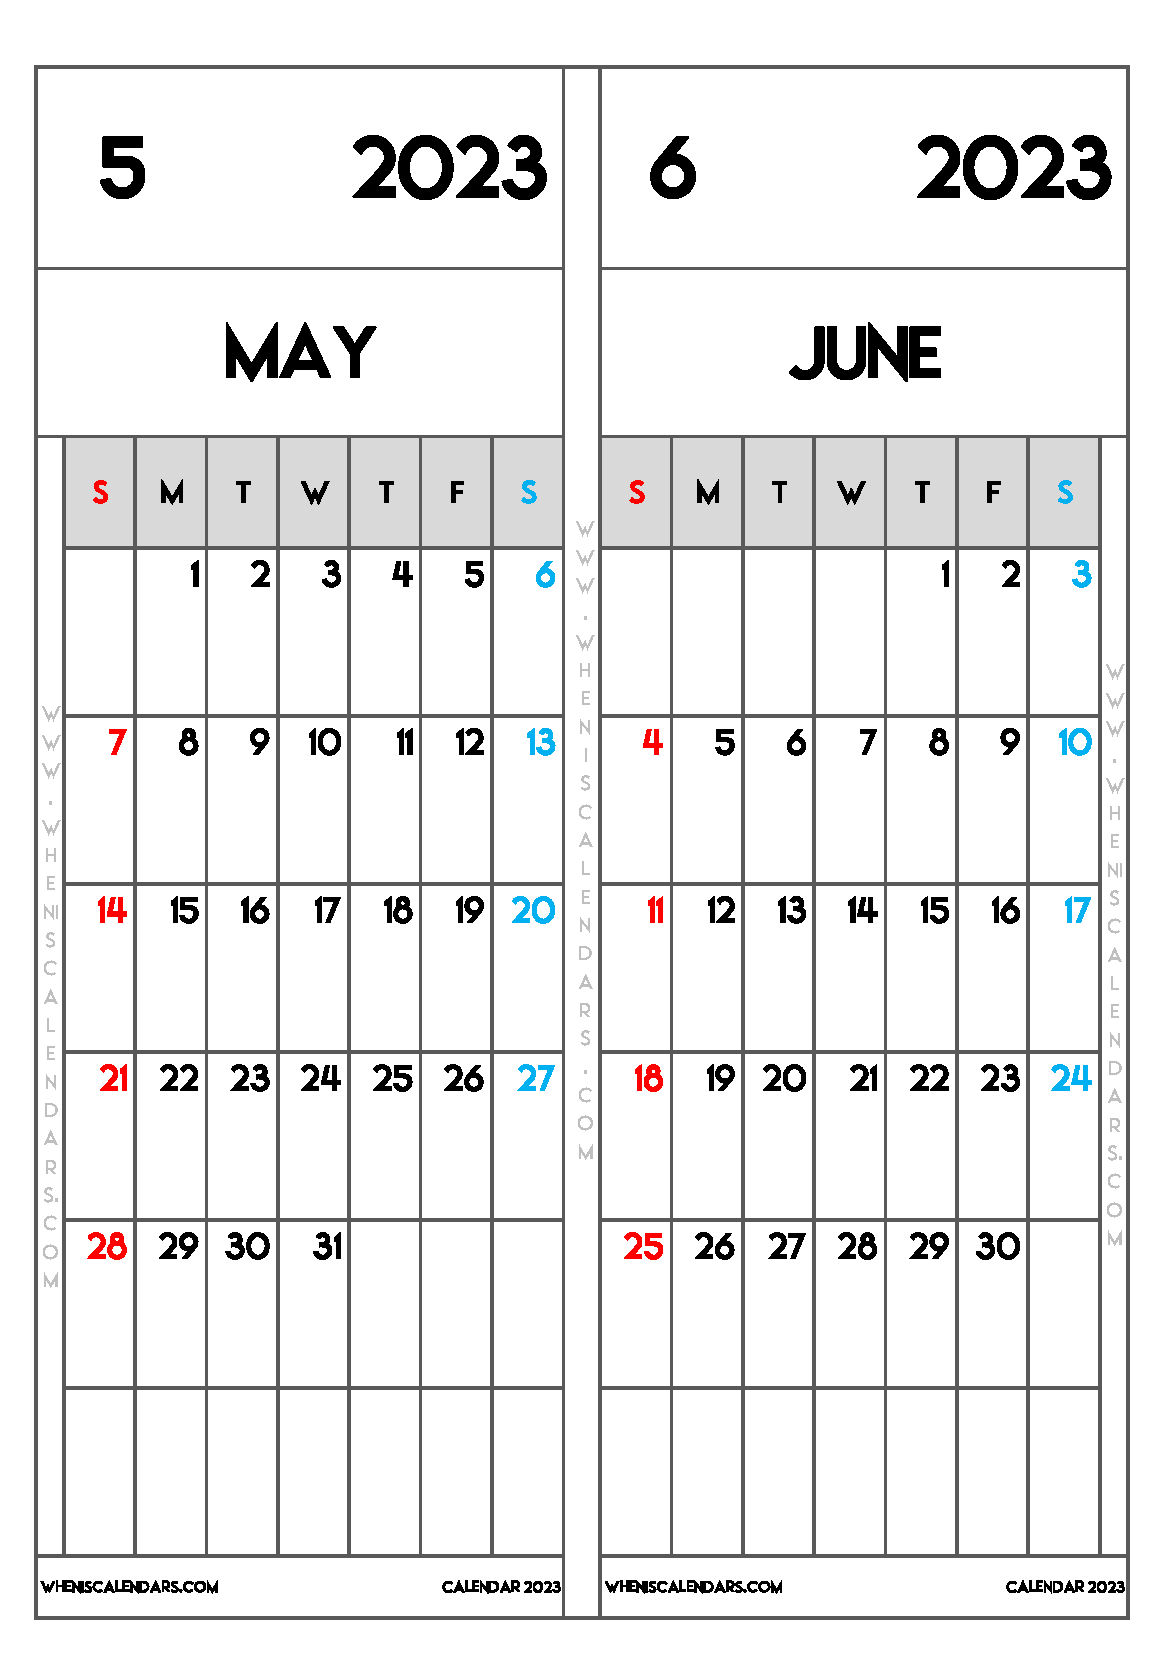 Download Free Printable May and June 2023 Calendar as PDF and PNG Image